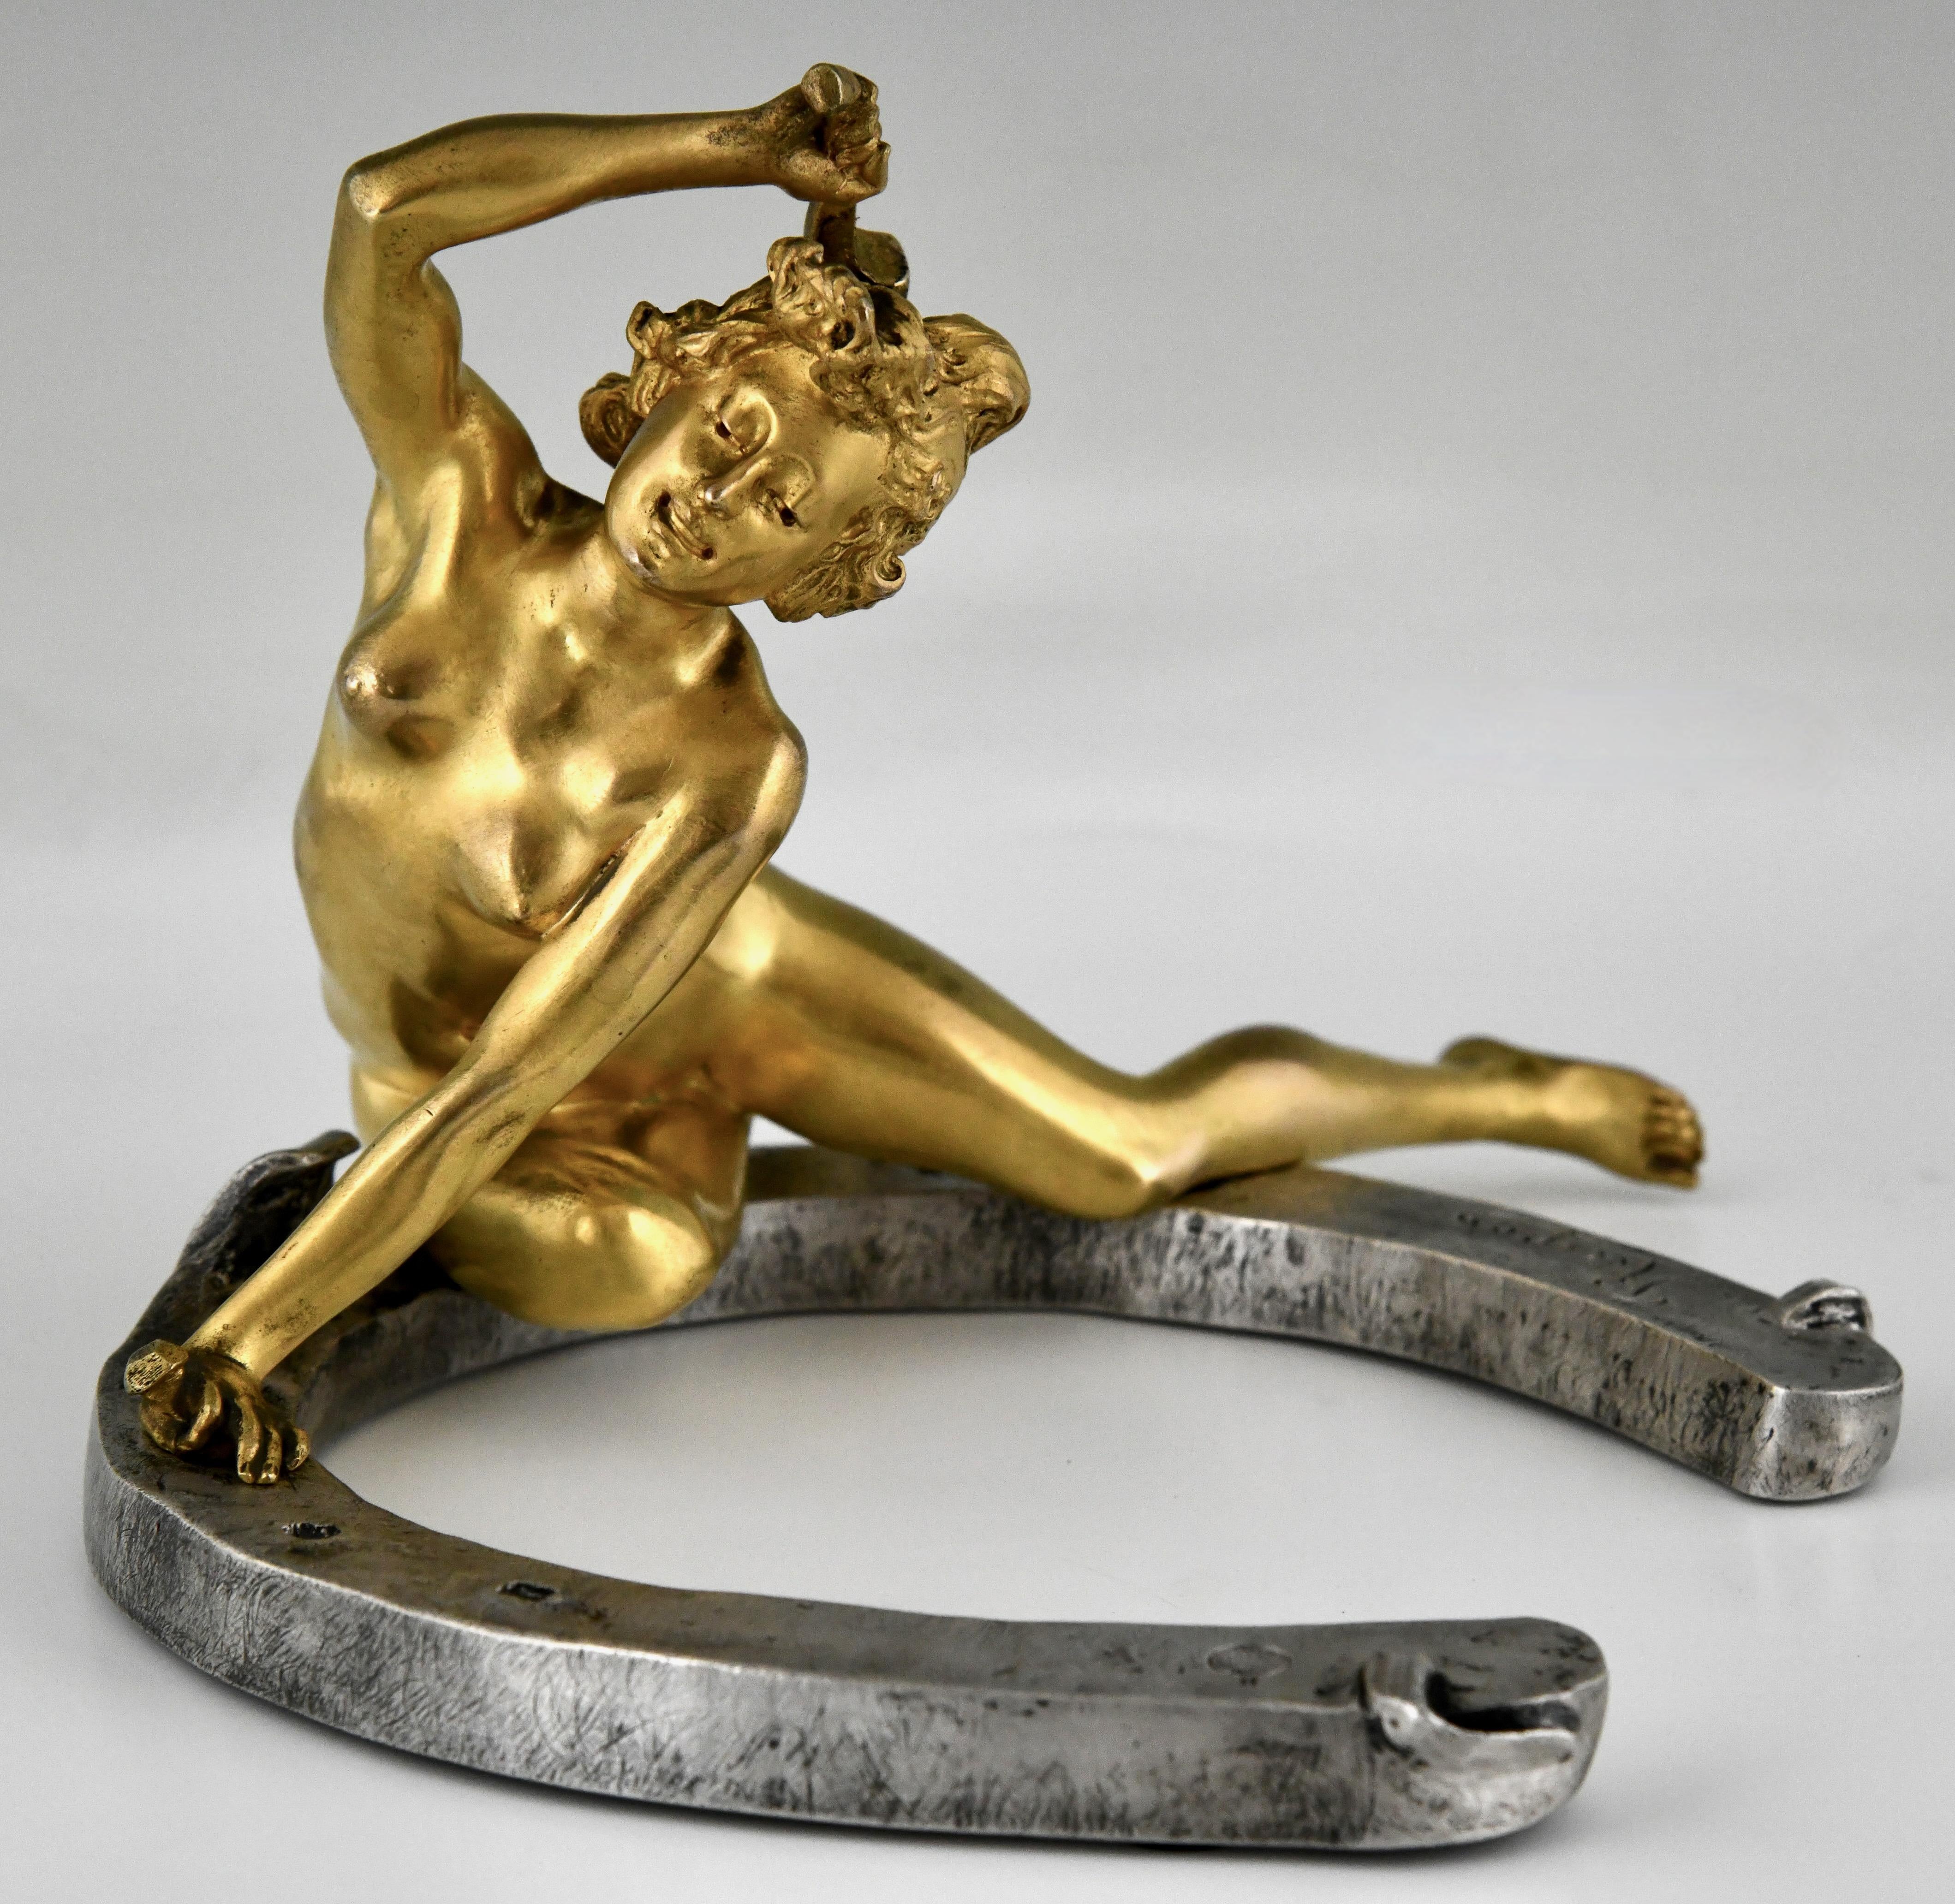 Art Nouveau bronze sculpture nude on horseshoe by Georges Récipon, foundry mark Susse frères foundry. 
Gilt en patinated bronze.
France 1896. 
This is the large version of this model.
With COA. 

This model is illustrated in
Dynamic Beauty,